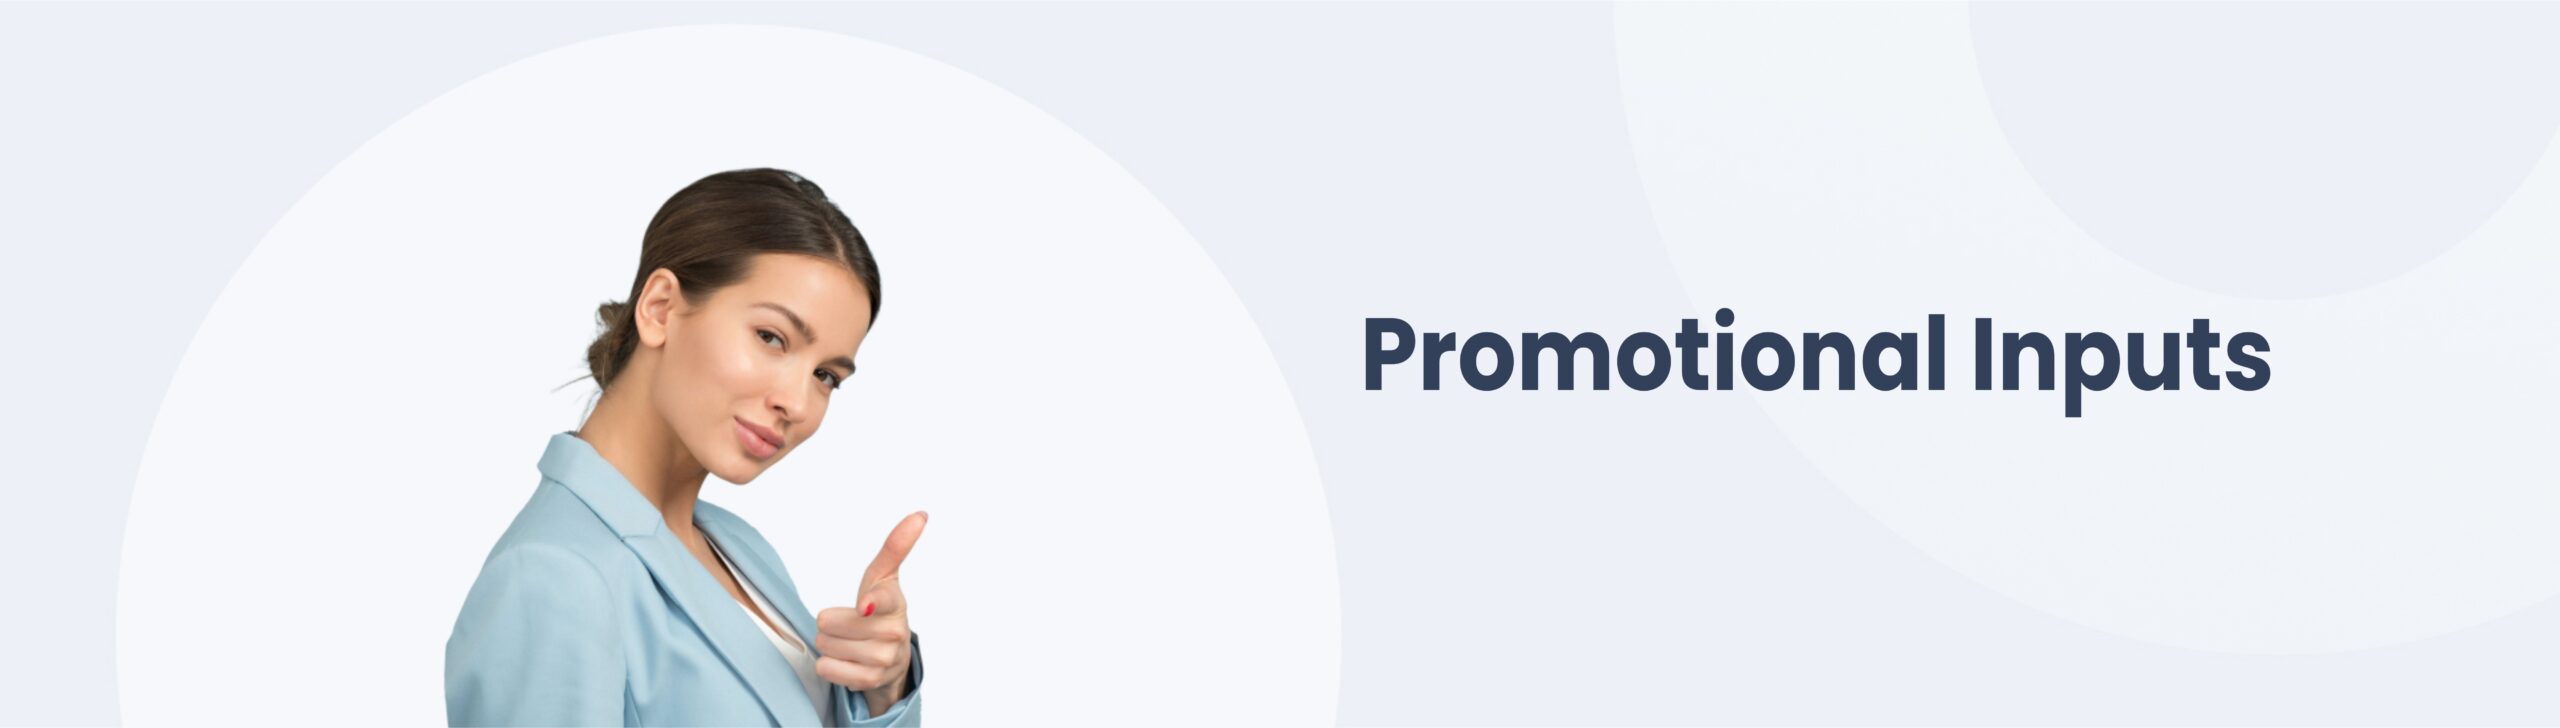 Promotional Inputs page banner image